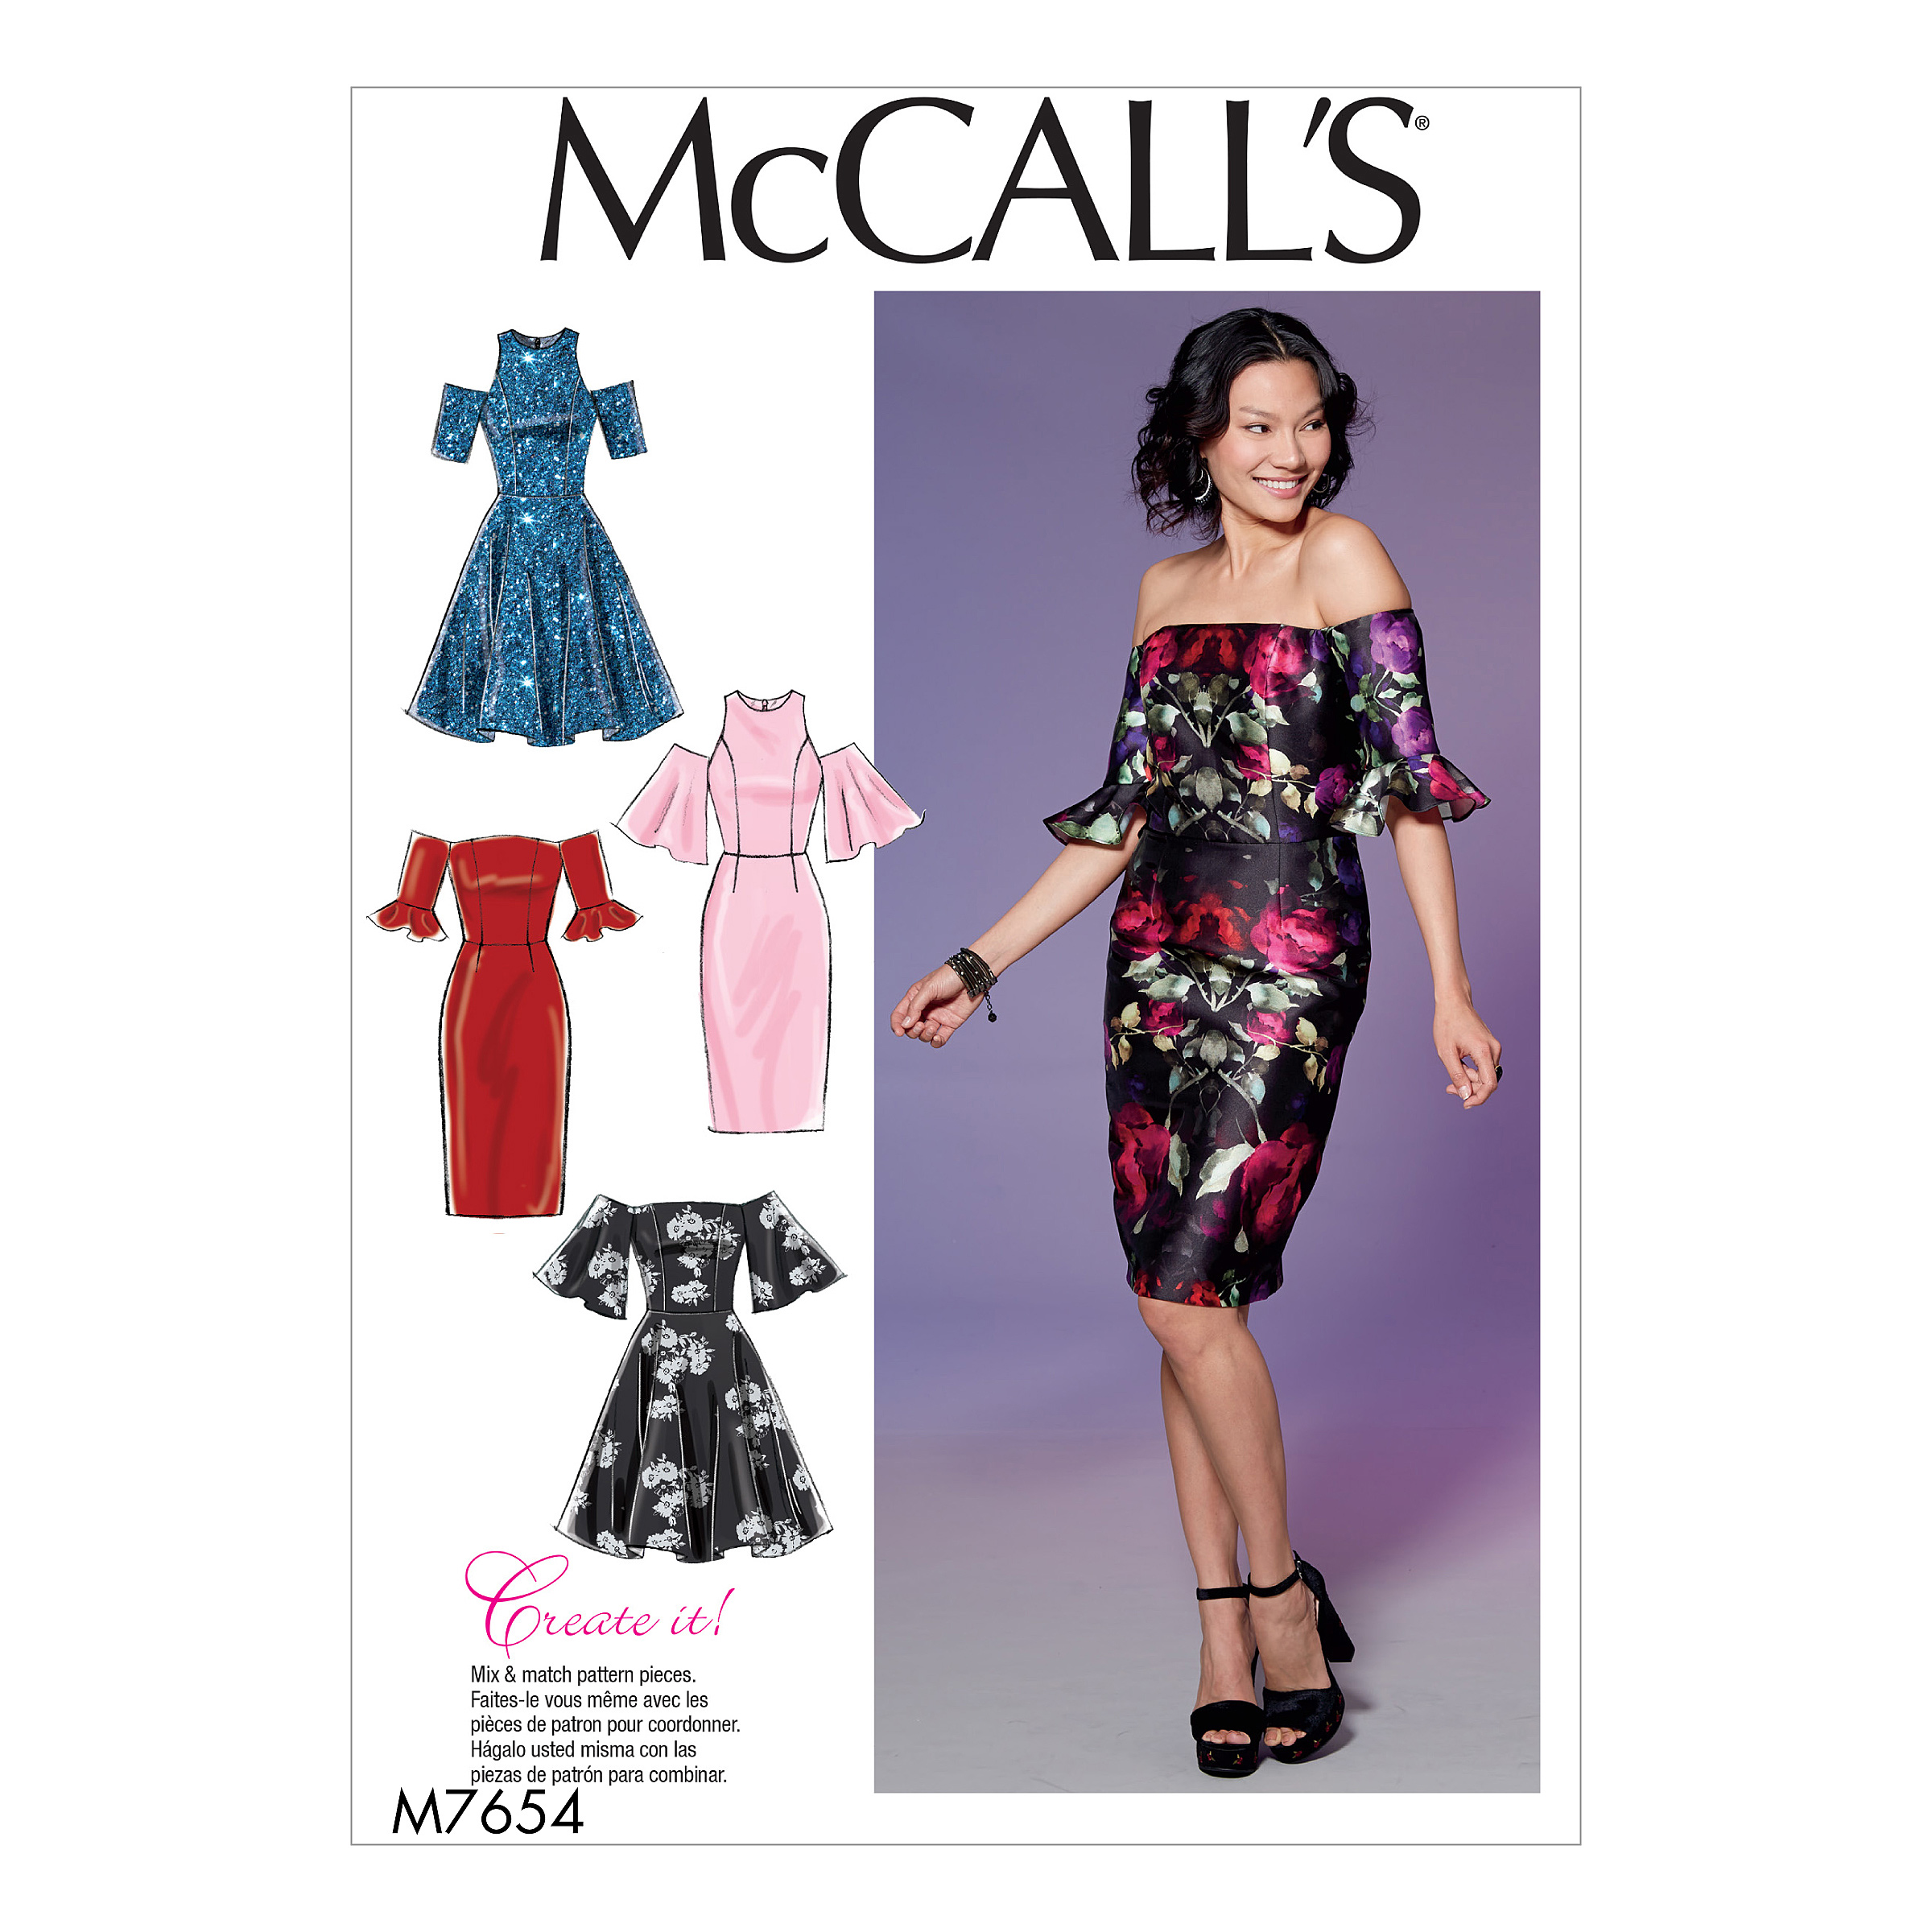 Summer Dress with built in Bra- McCall's 6561 - Uncut Sewing Pattern